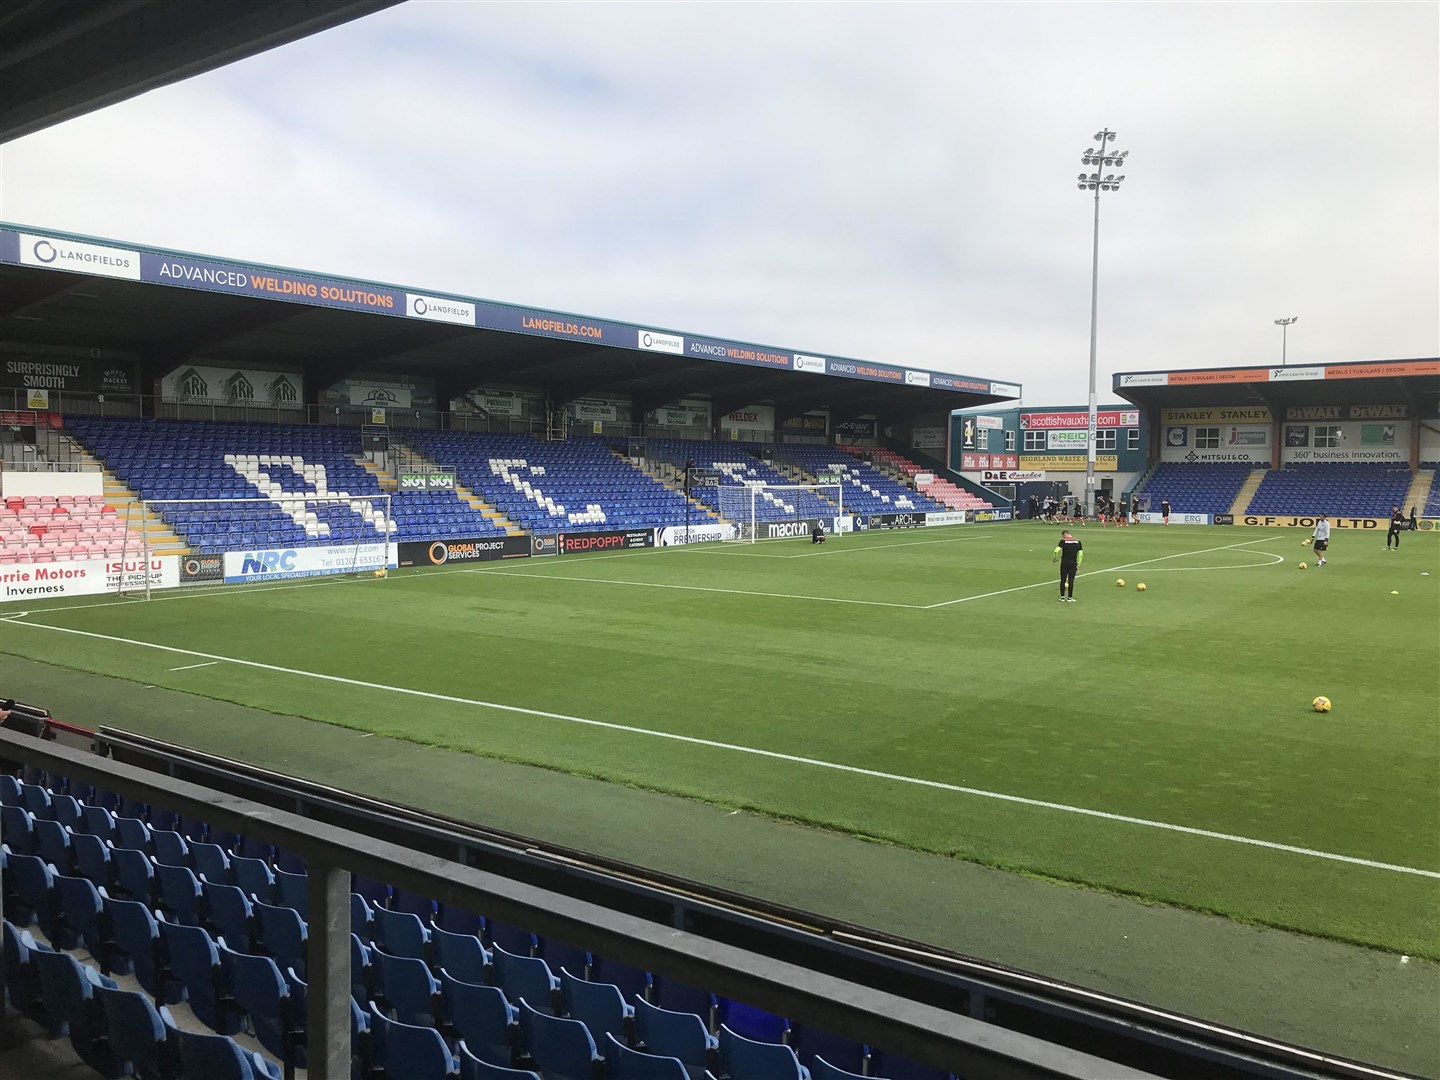 Fans could be welcomed back at Ross County if chosen as a test venue. Picture: Will Clark